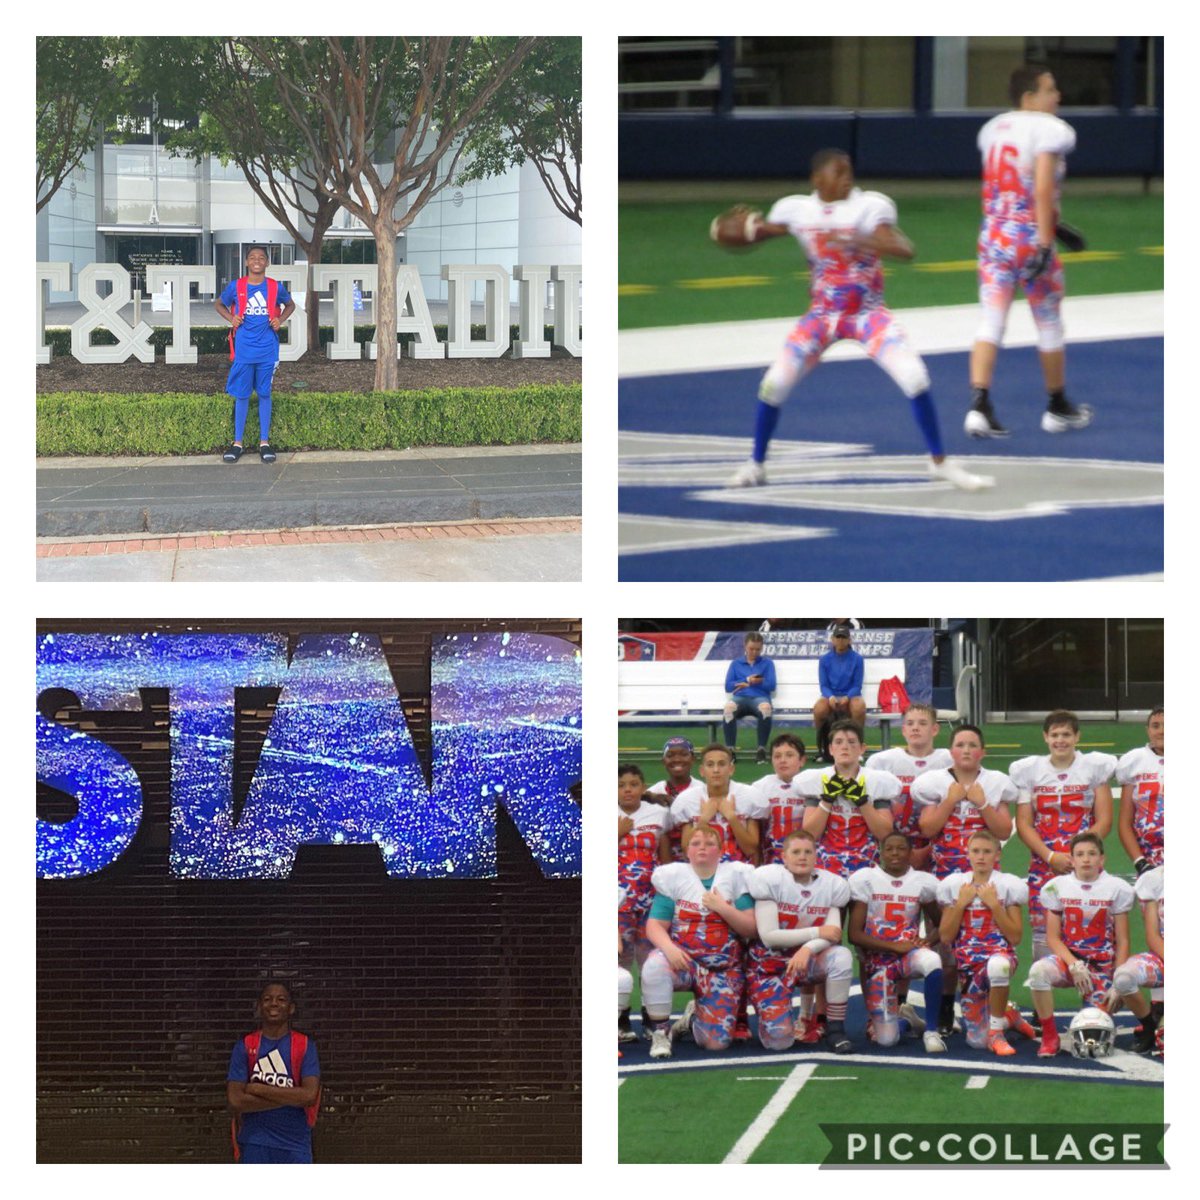 ⁦⁦@DereonColeman_3⁩ Congrats on your victory today. ⁦@KezzieColeman⁩ our son shined Bright today in the AT&T Dome. Continue to put God first and never give up. #GodgivenTalent BTRuQBTRaining ⁦@ODFBall⁩ ⁦@AdvancedQBCamp⁩ ⁦@baylintrujillo⁩ ⁦